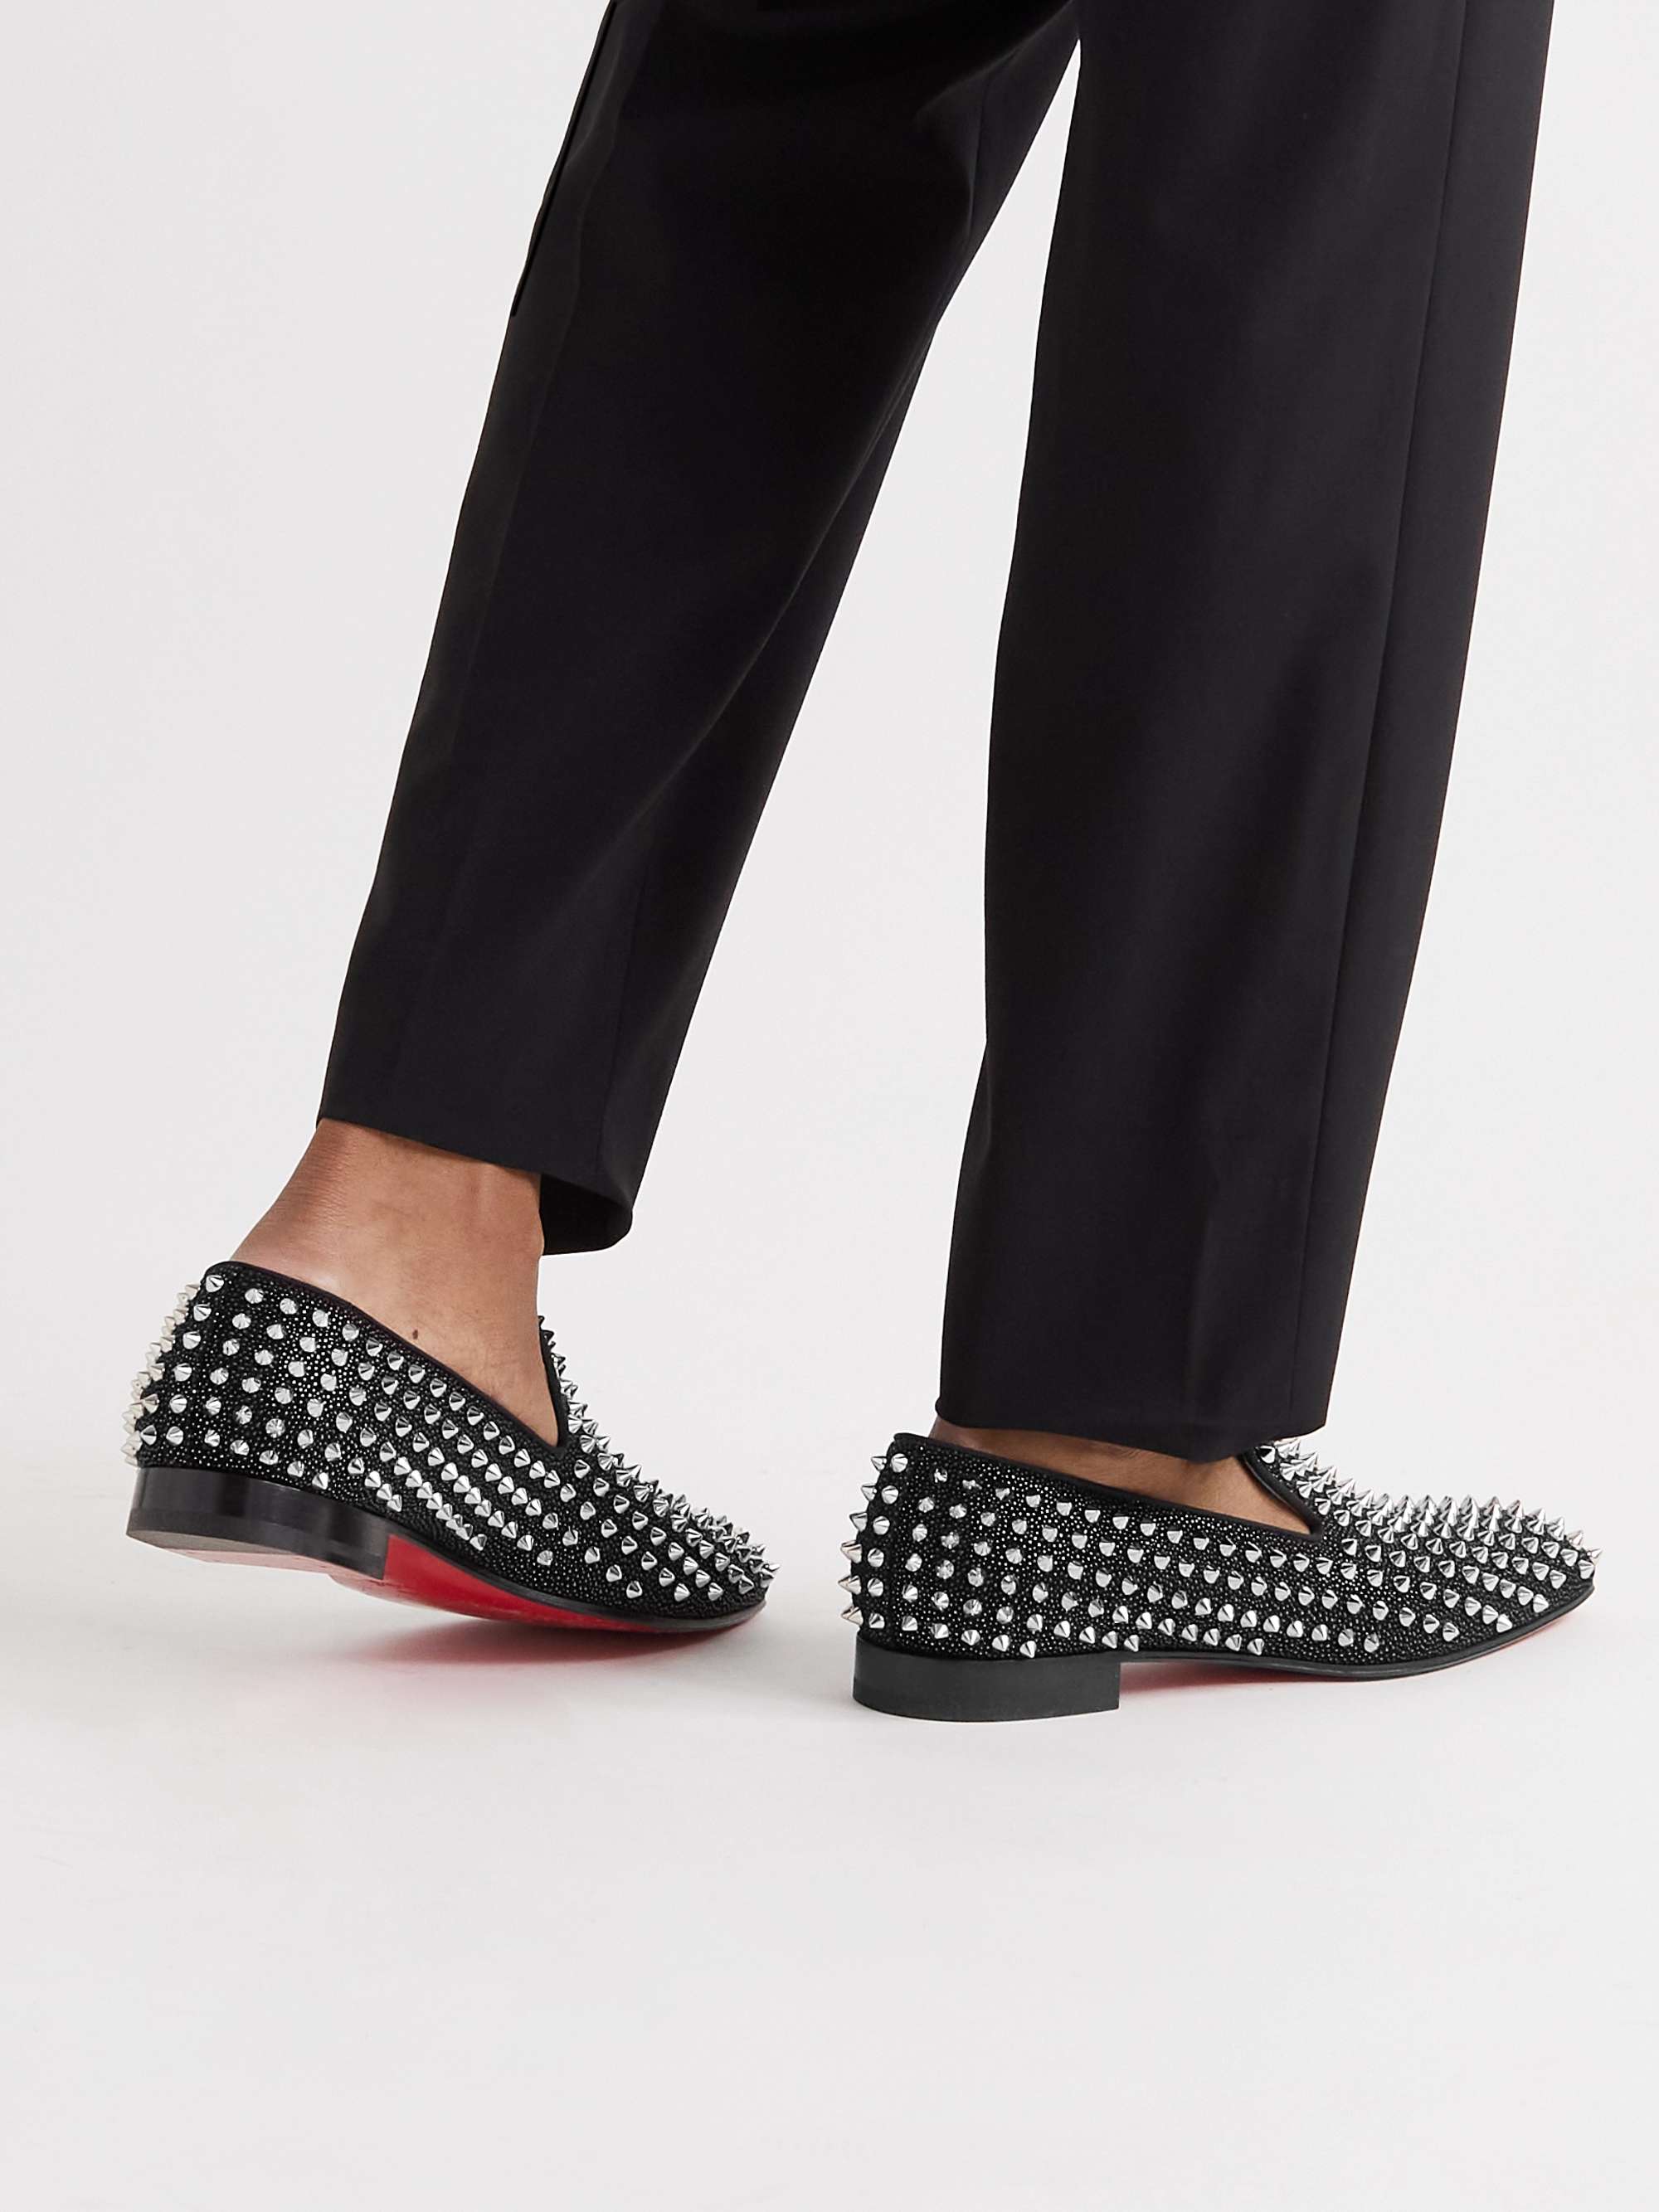 CHRISTIAN LOUBOUTIN Dandelion Spiked Suede Loafers